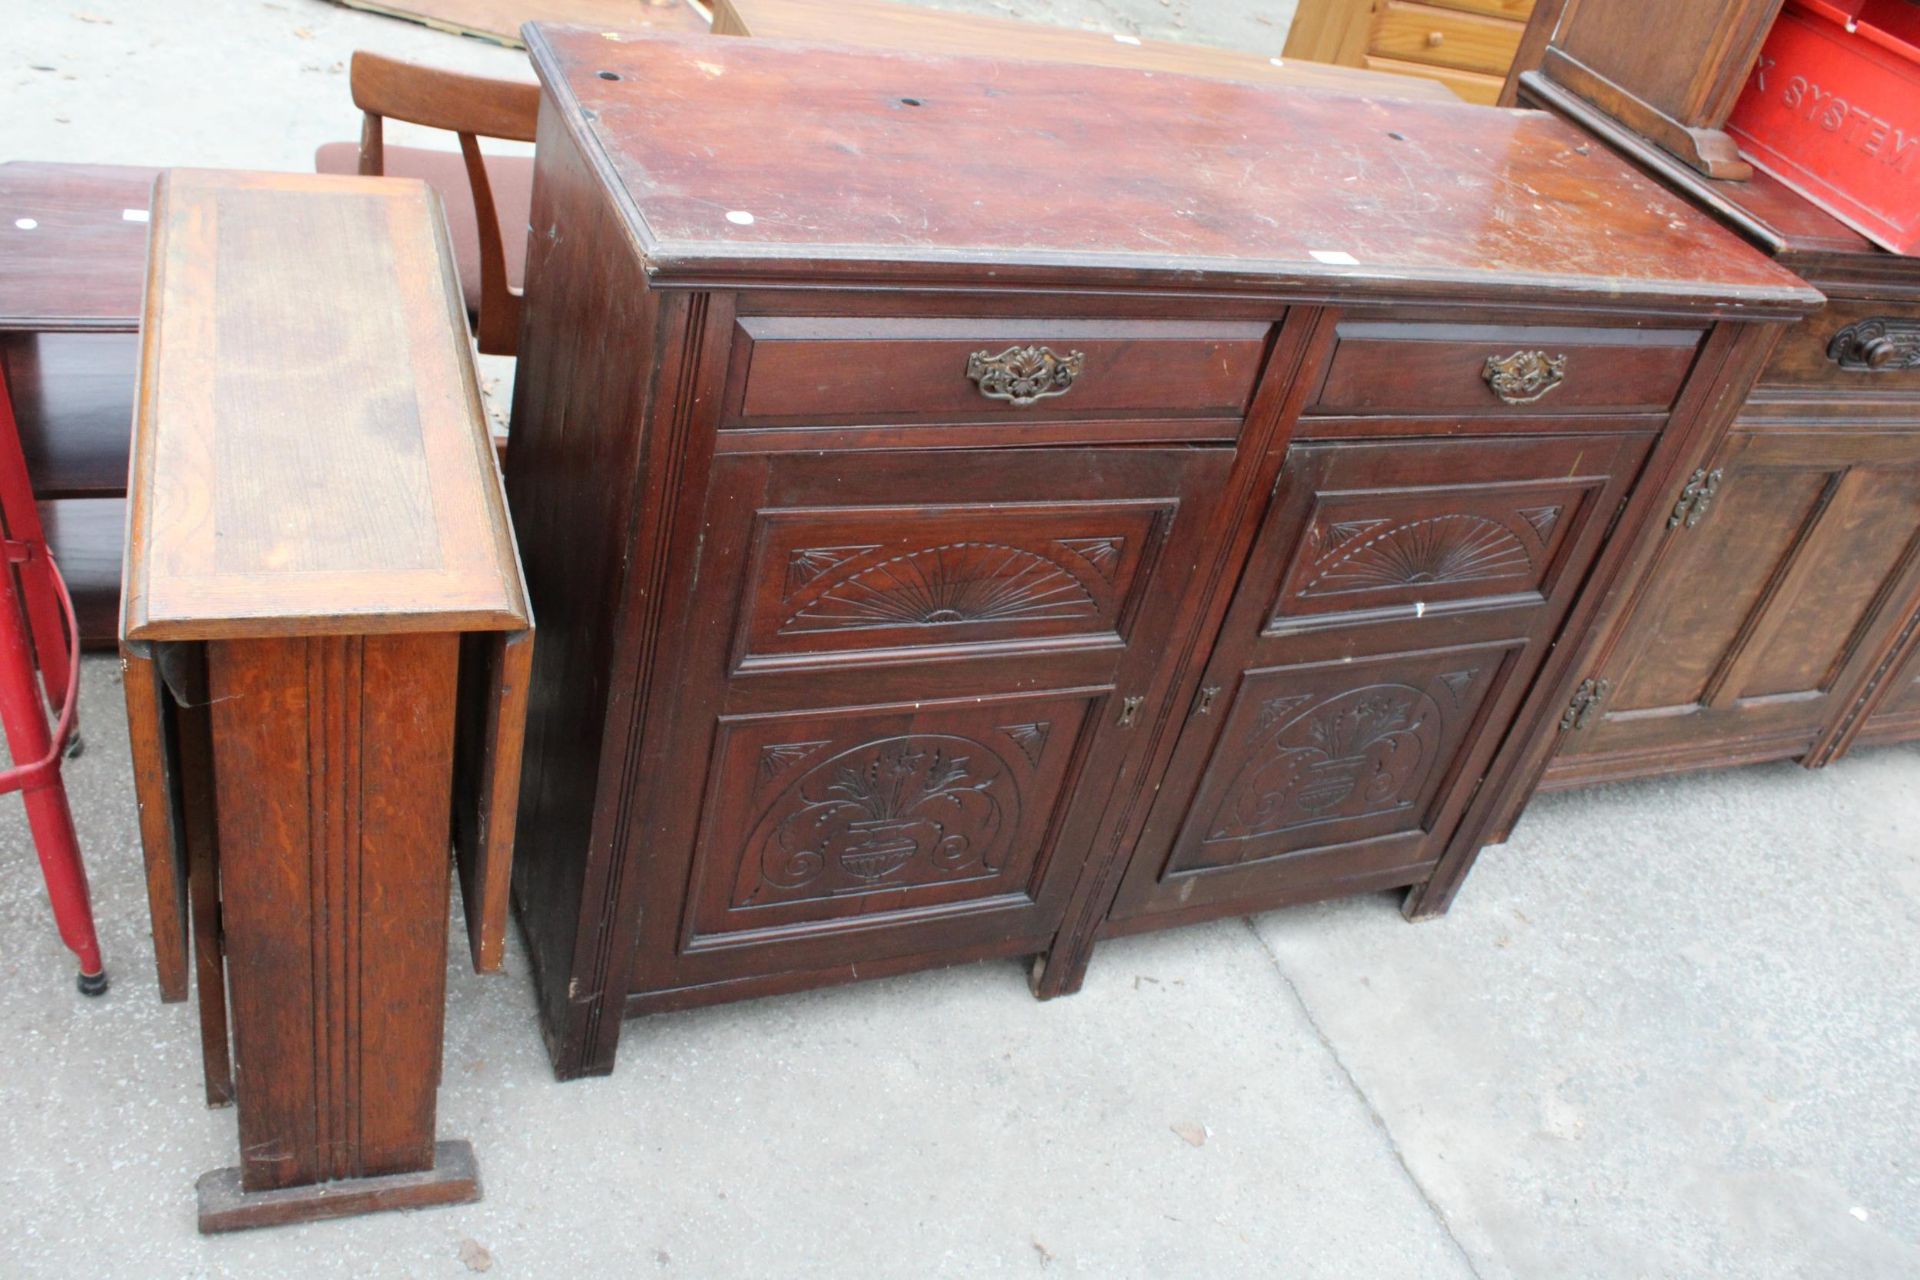 A LATE VICTORIAN SIDEBOARD AND OAK DROP LEAF DINING TABLE